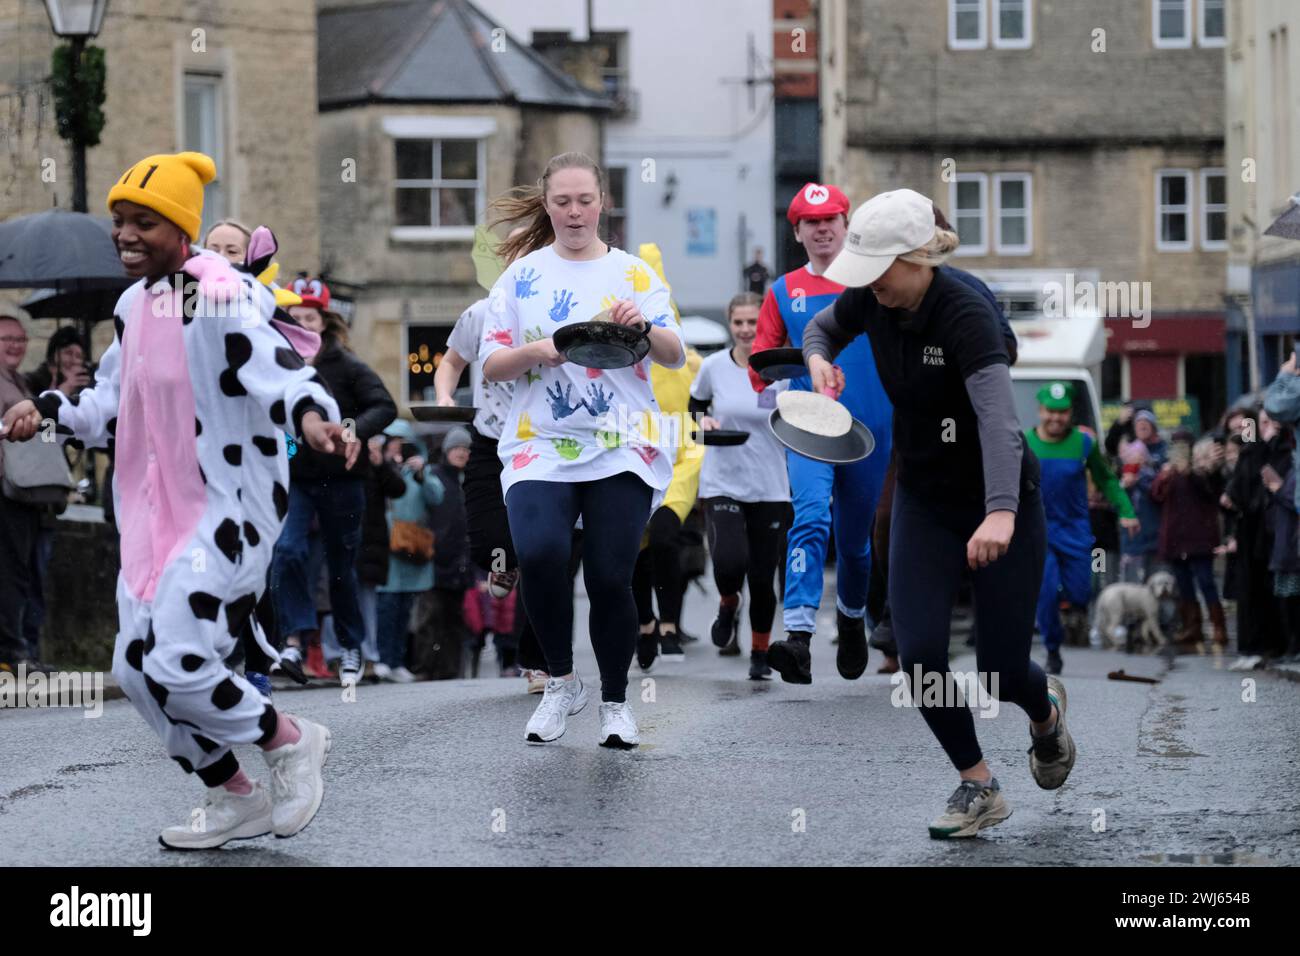 Bradford-on Avon, Wiltshire, UK. 13th Feb, 2024. The annual pancake race along the town bridge in Wiltshire's historic Bradford-on-Avon. The main road is closed for a few minutes each Shrove Tuesday for this traditional light-hearted race; the route is over the Bridge and back again. Each pancake must be tossed at least three times along the route, otherwise the competitor is disqualified. Shrove Tuesday is a Christian Feast Day before the start of Lent, an opportunity to use up fats and sugars before fasting. Credit: JMF News/Alamy Live News Stock Photo